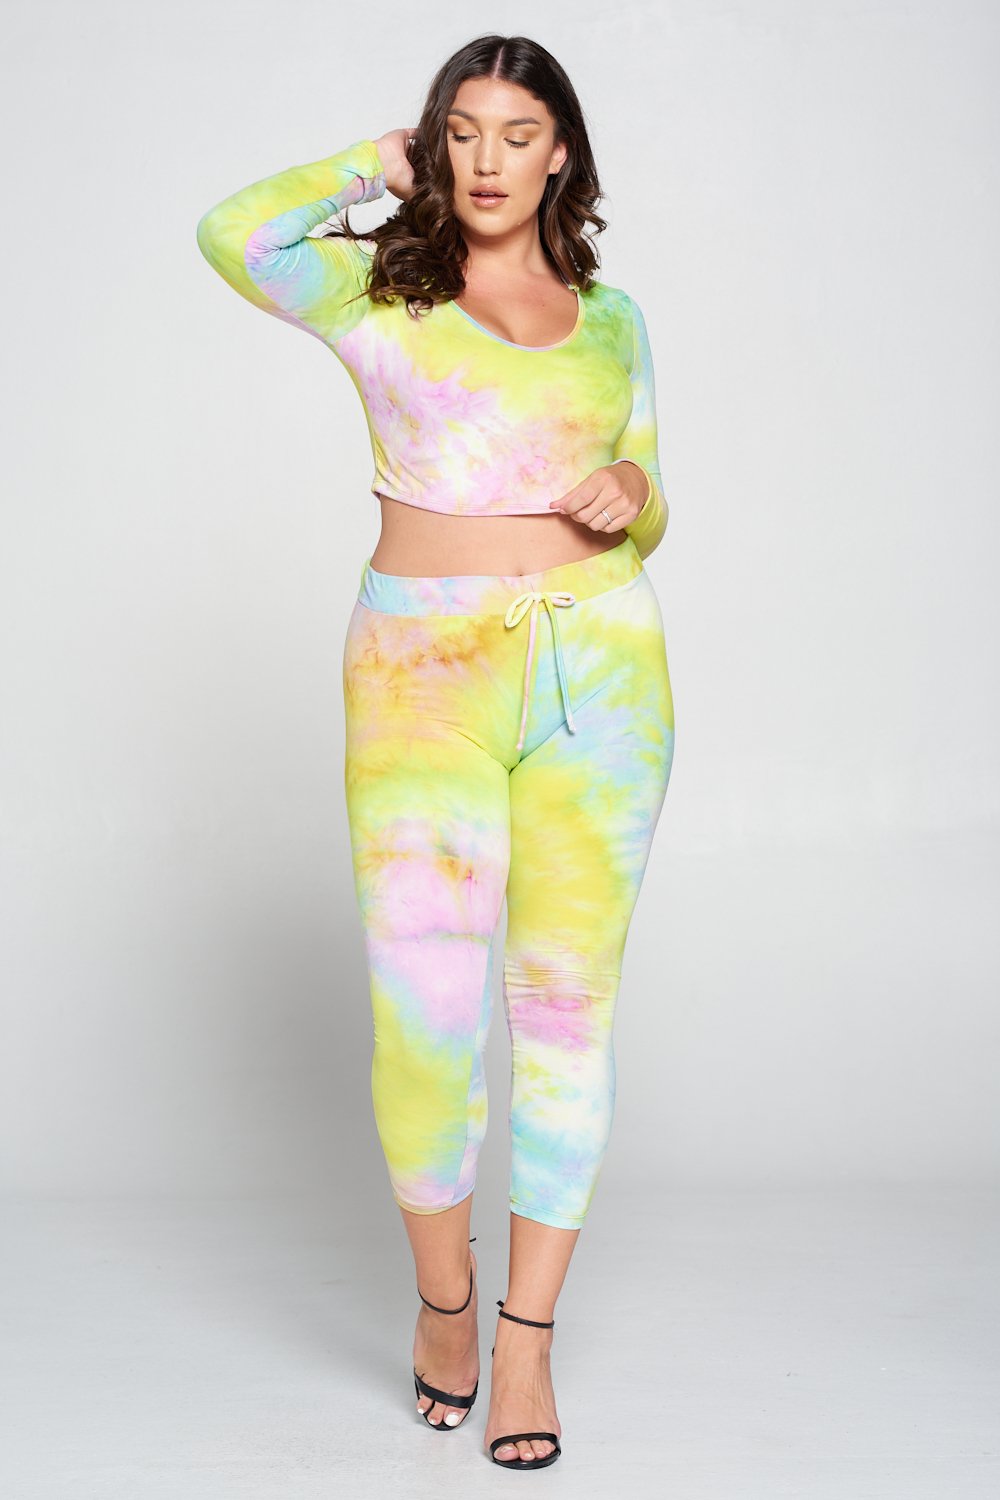 livd L I V D women's contemporary plus size  scoop neck crop hoodie and elastic band sweatpant with faux drawstring in yellow tie dye